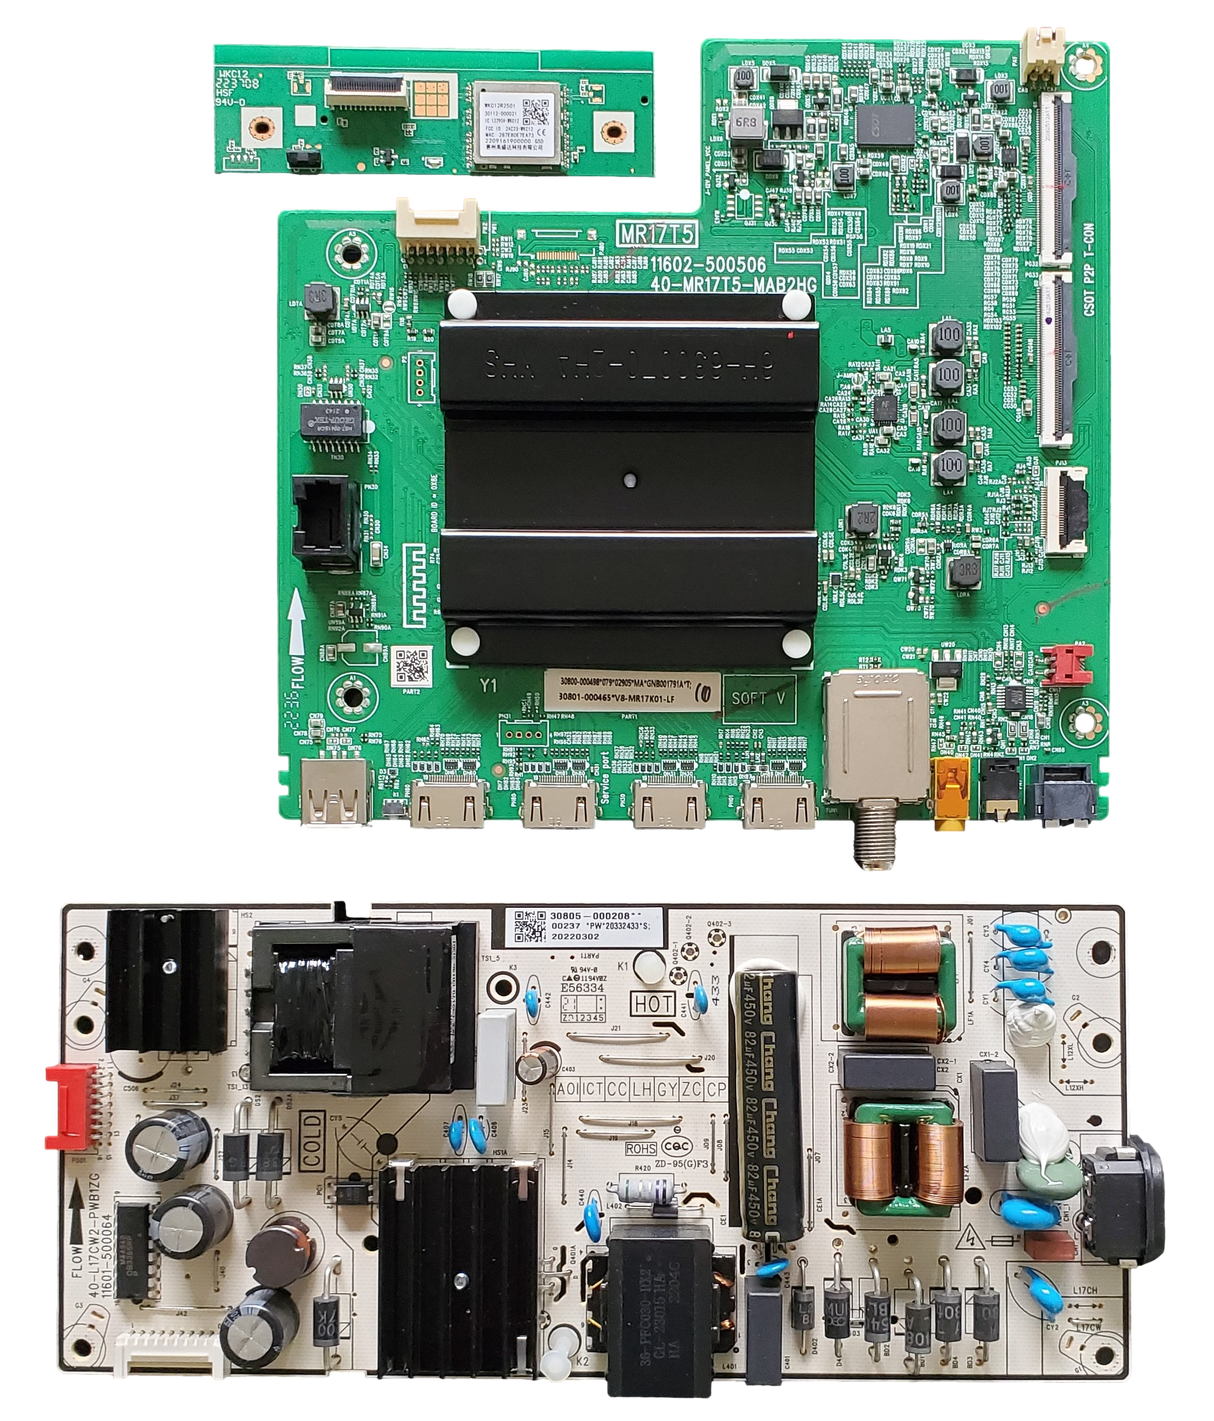 65S455 TCL TV Repair Parts Kit, 30800-000498 Main Board, 30805-000208 Power Supply, 30112-000021 Wifi, 65S455